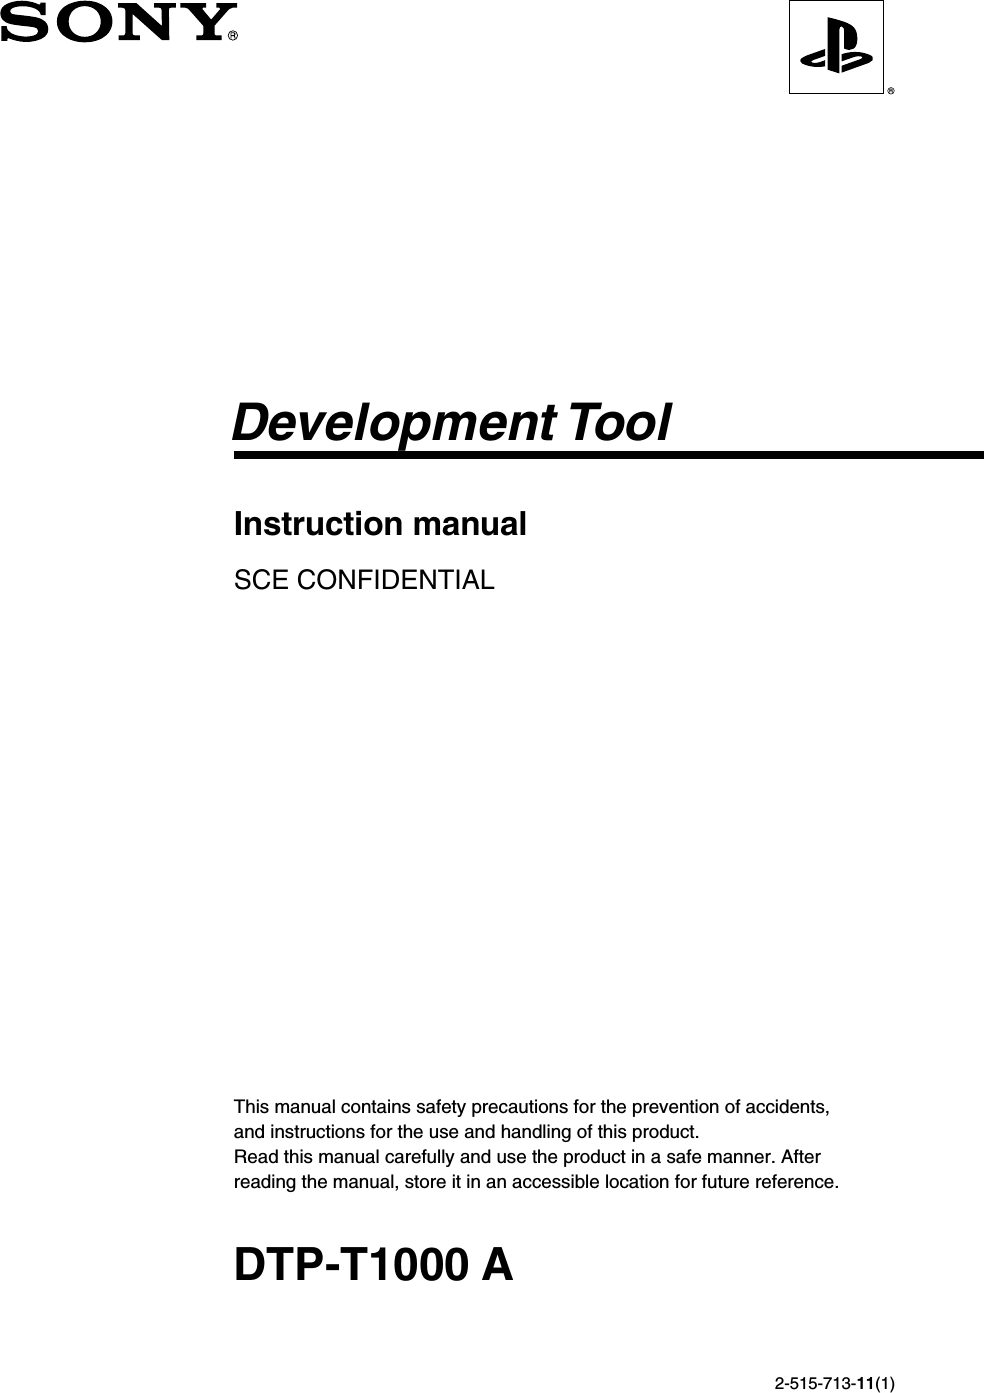 Instruction manualSCE CONFIDENTIALDTP-T1000 ADevelopment ToolThis manual contains safety precautions for the prevention of accidents,and instructions for the use and handling of this product.Read this manual carefully and use the product in a safe manner. Afterreading the manual, store it in an accessible location for future reference.2-515-713-11(1)